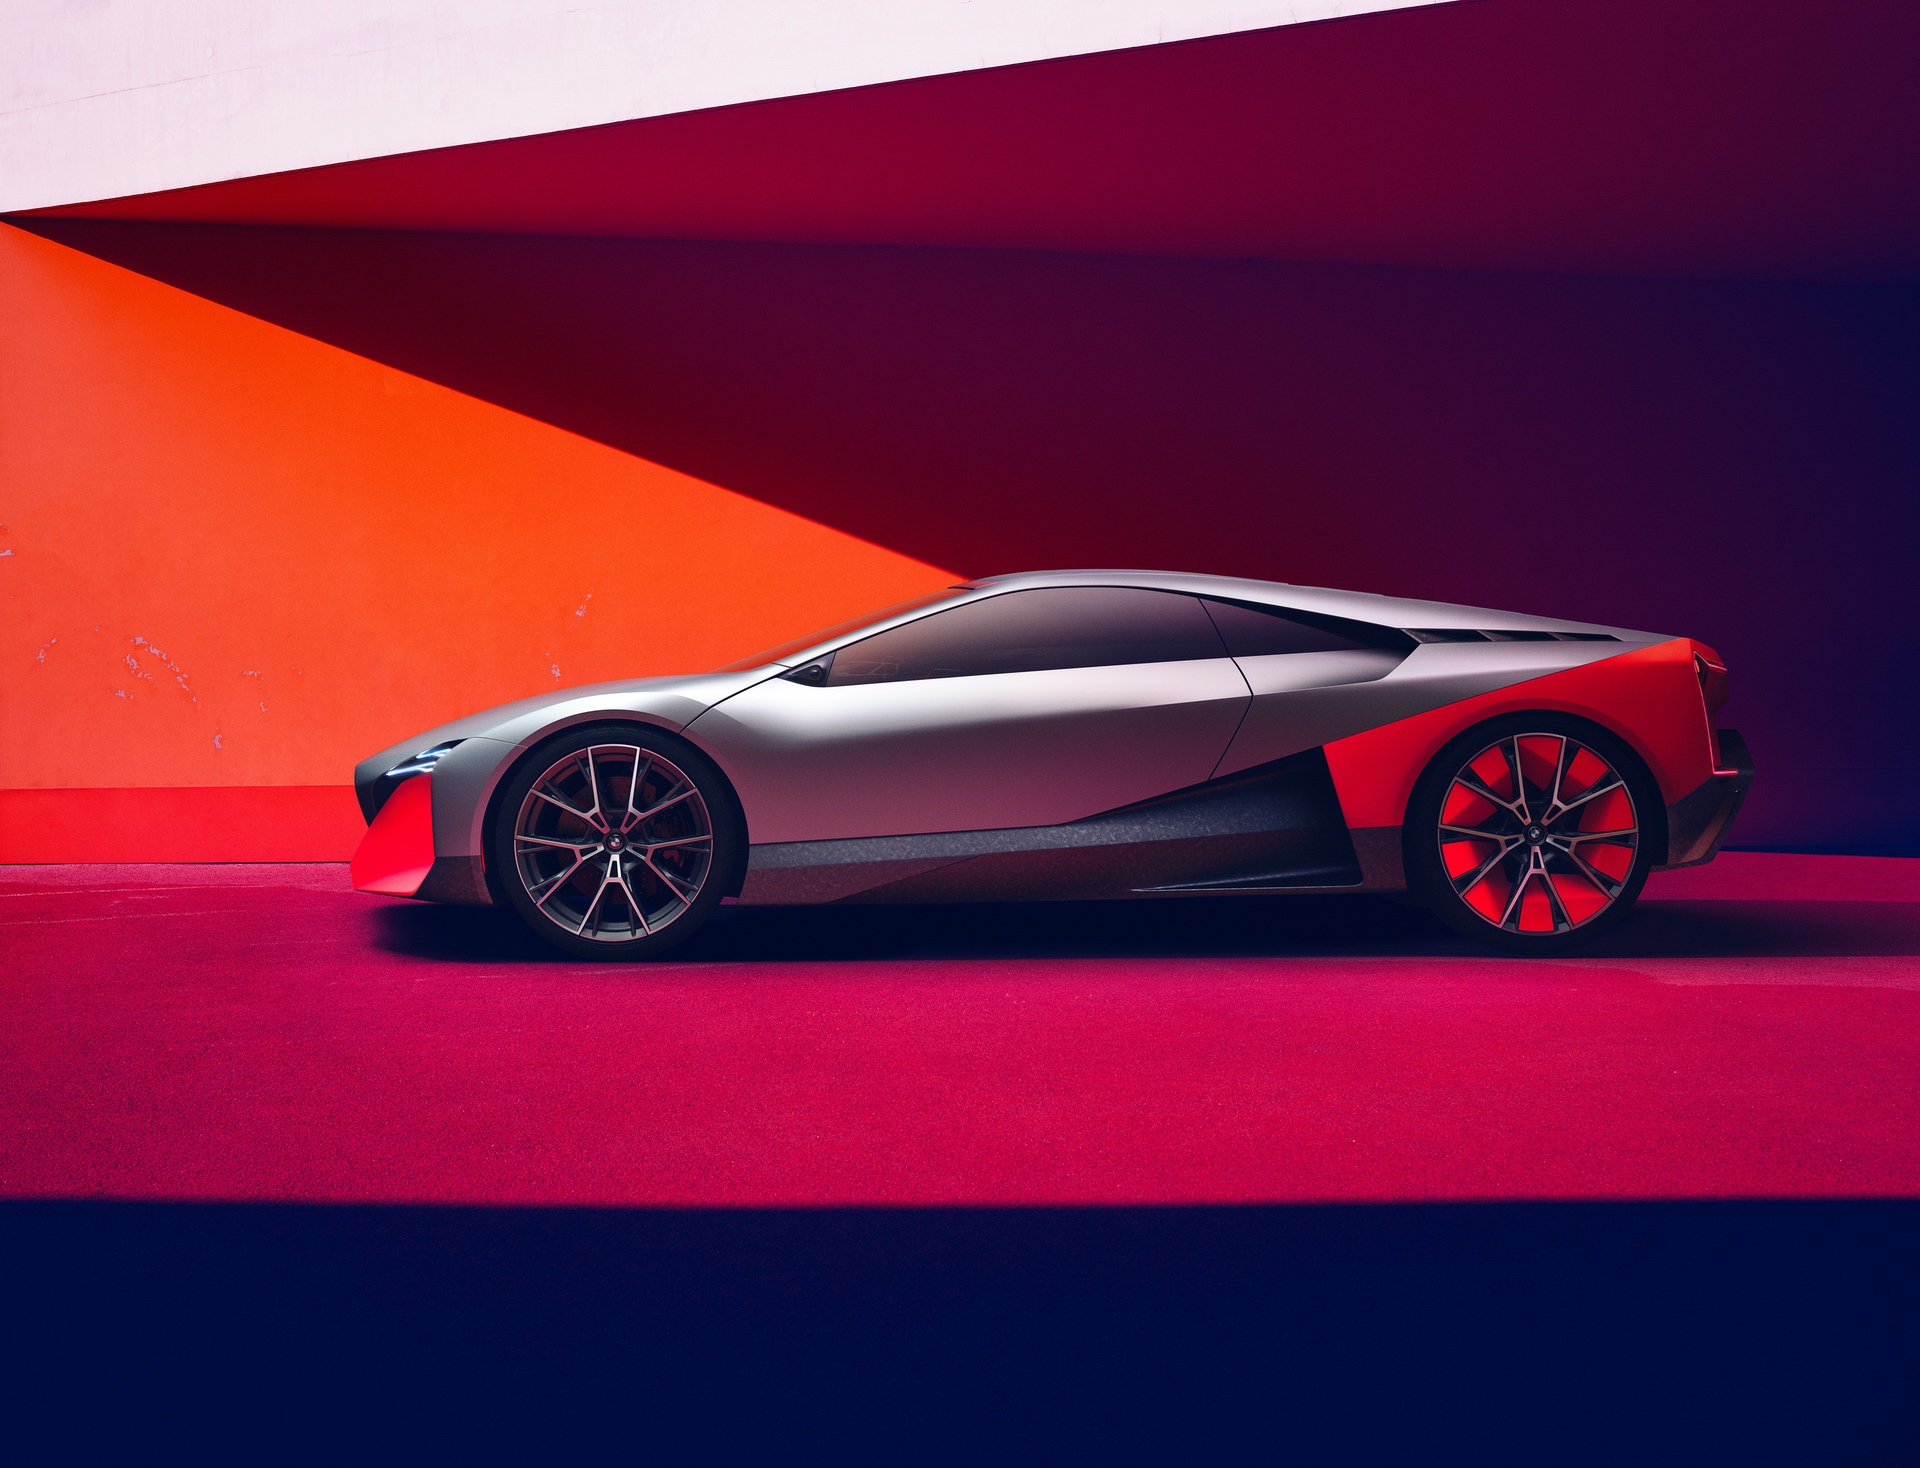 WORLD PREMIERE: The Future of Performance — The BMW Vision M Next